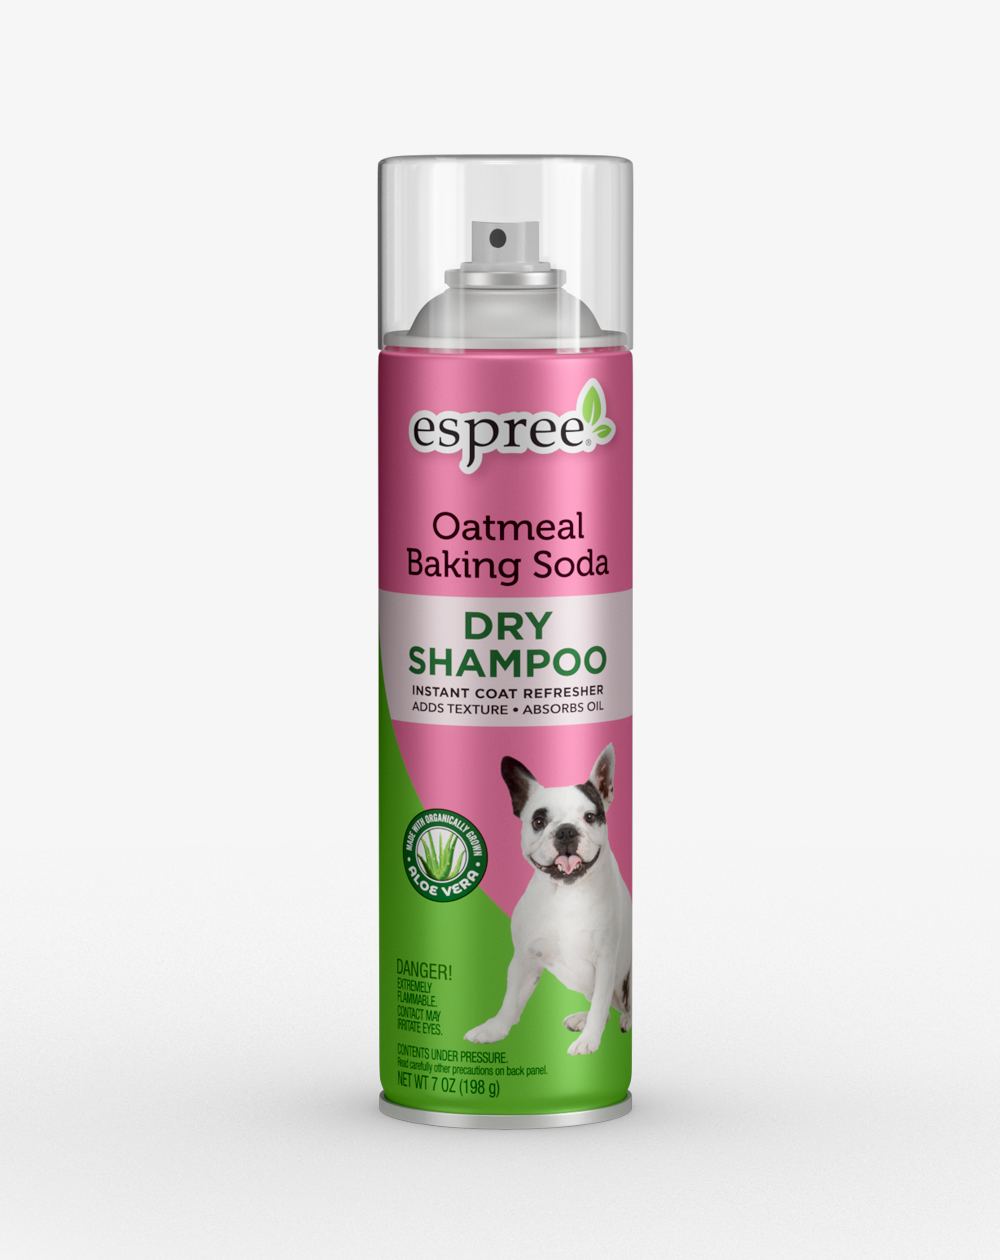 Eftermæle Skygge Udveksle Dry bath for dogs that combines oatmeal and baking soda to deodorize and  absorb oil | Espree